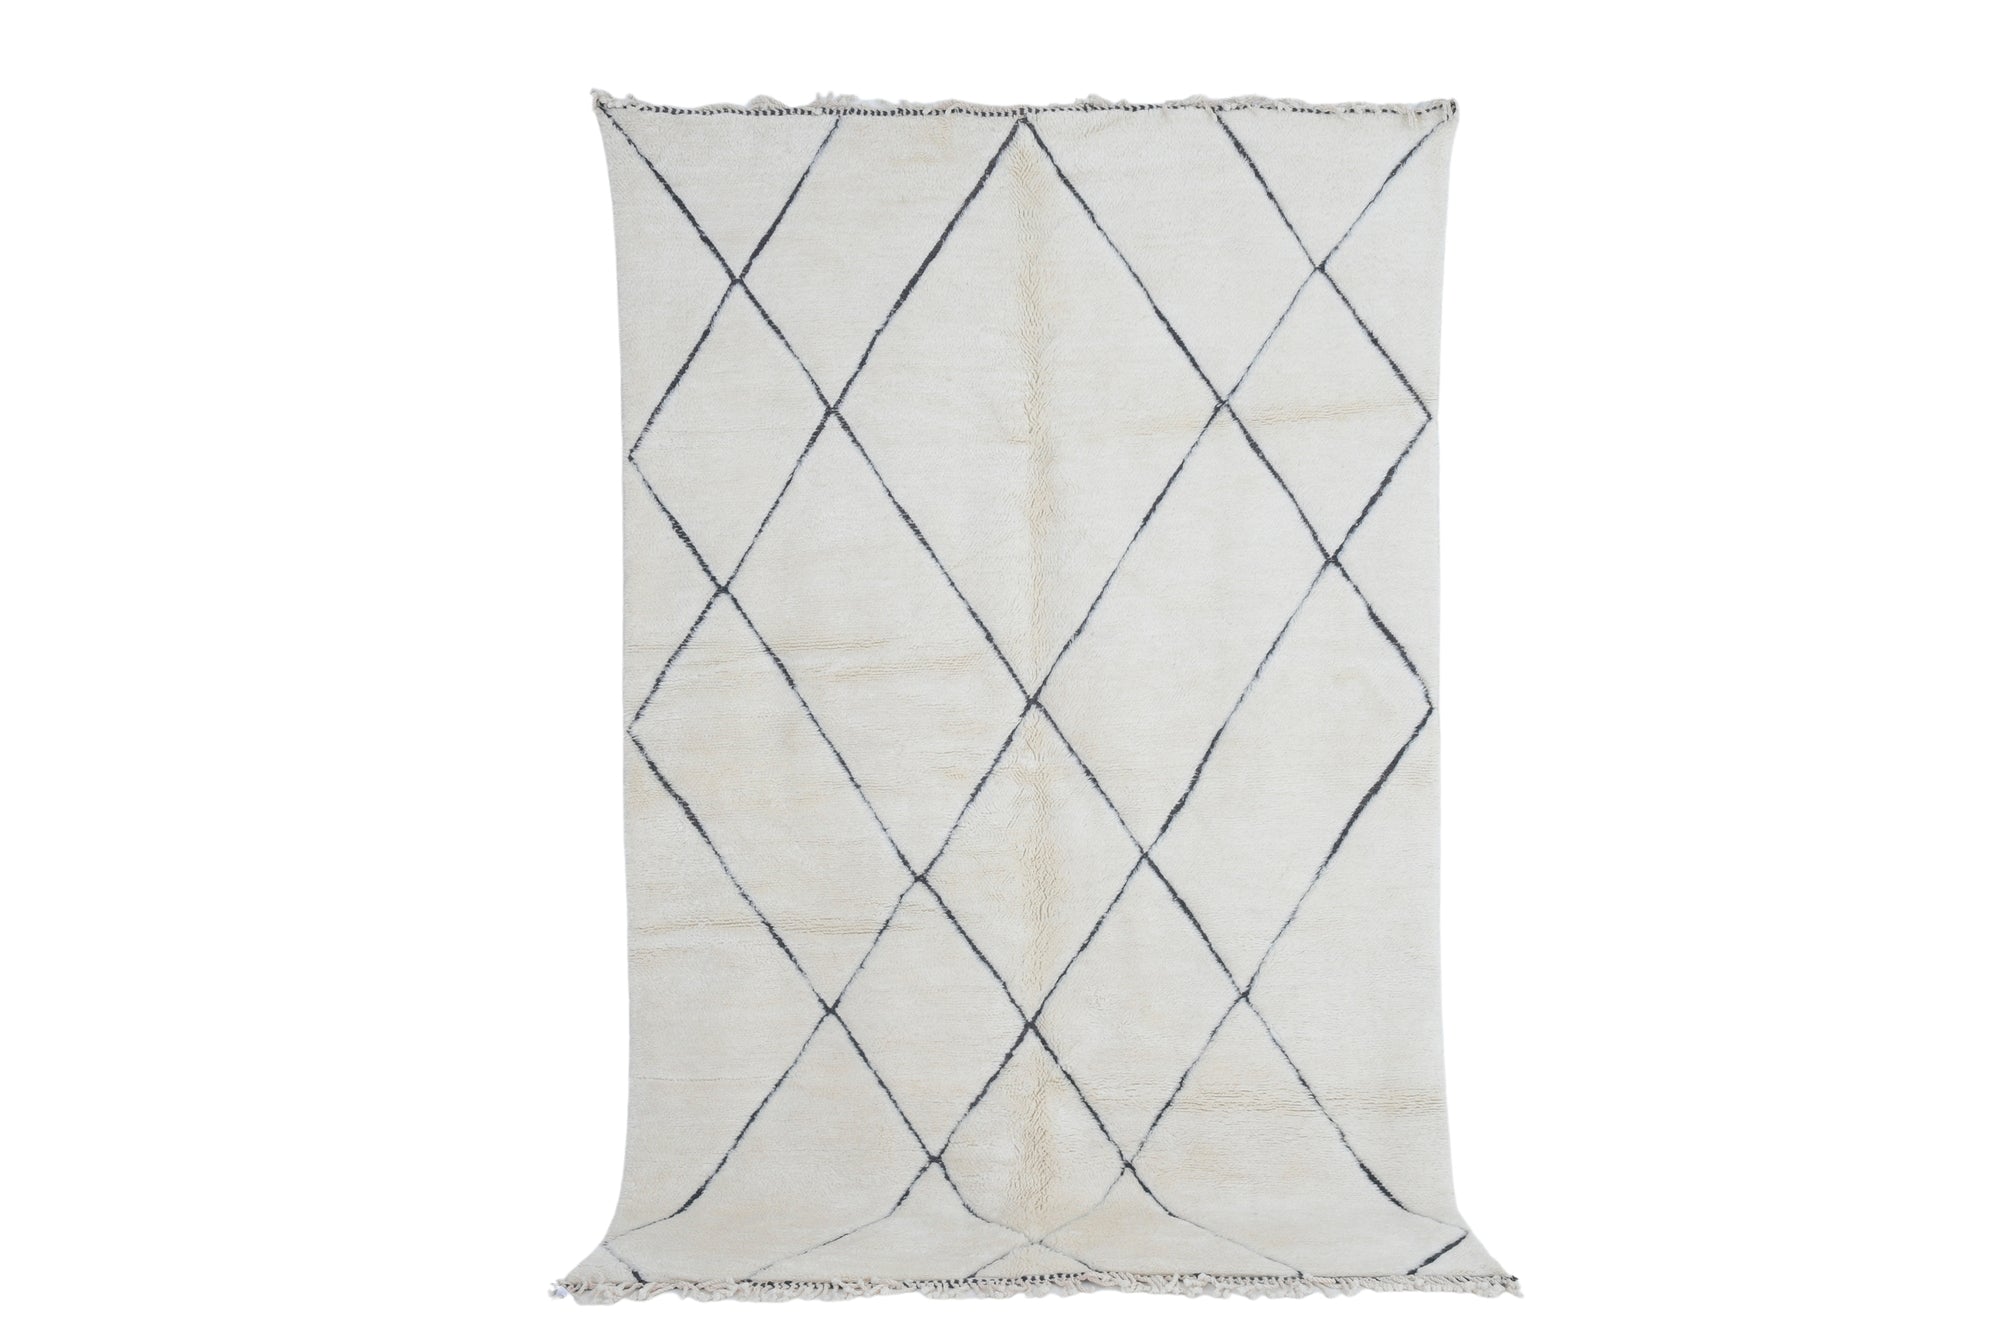 Aouich - LUXURY MRIRT RUG "EXCLUSIVE"